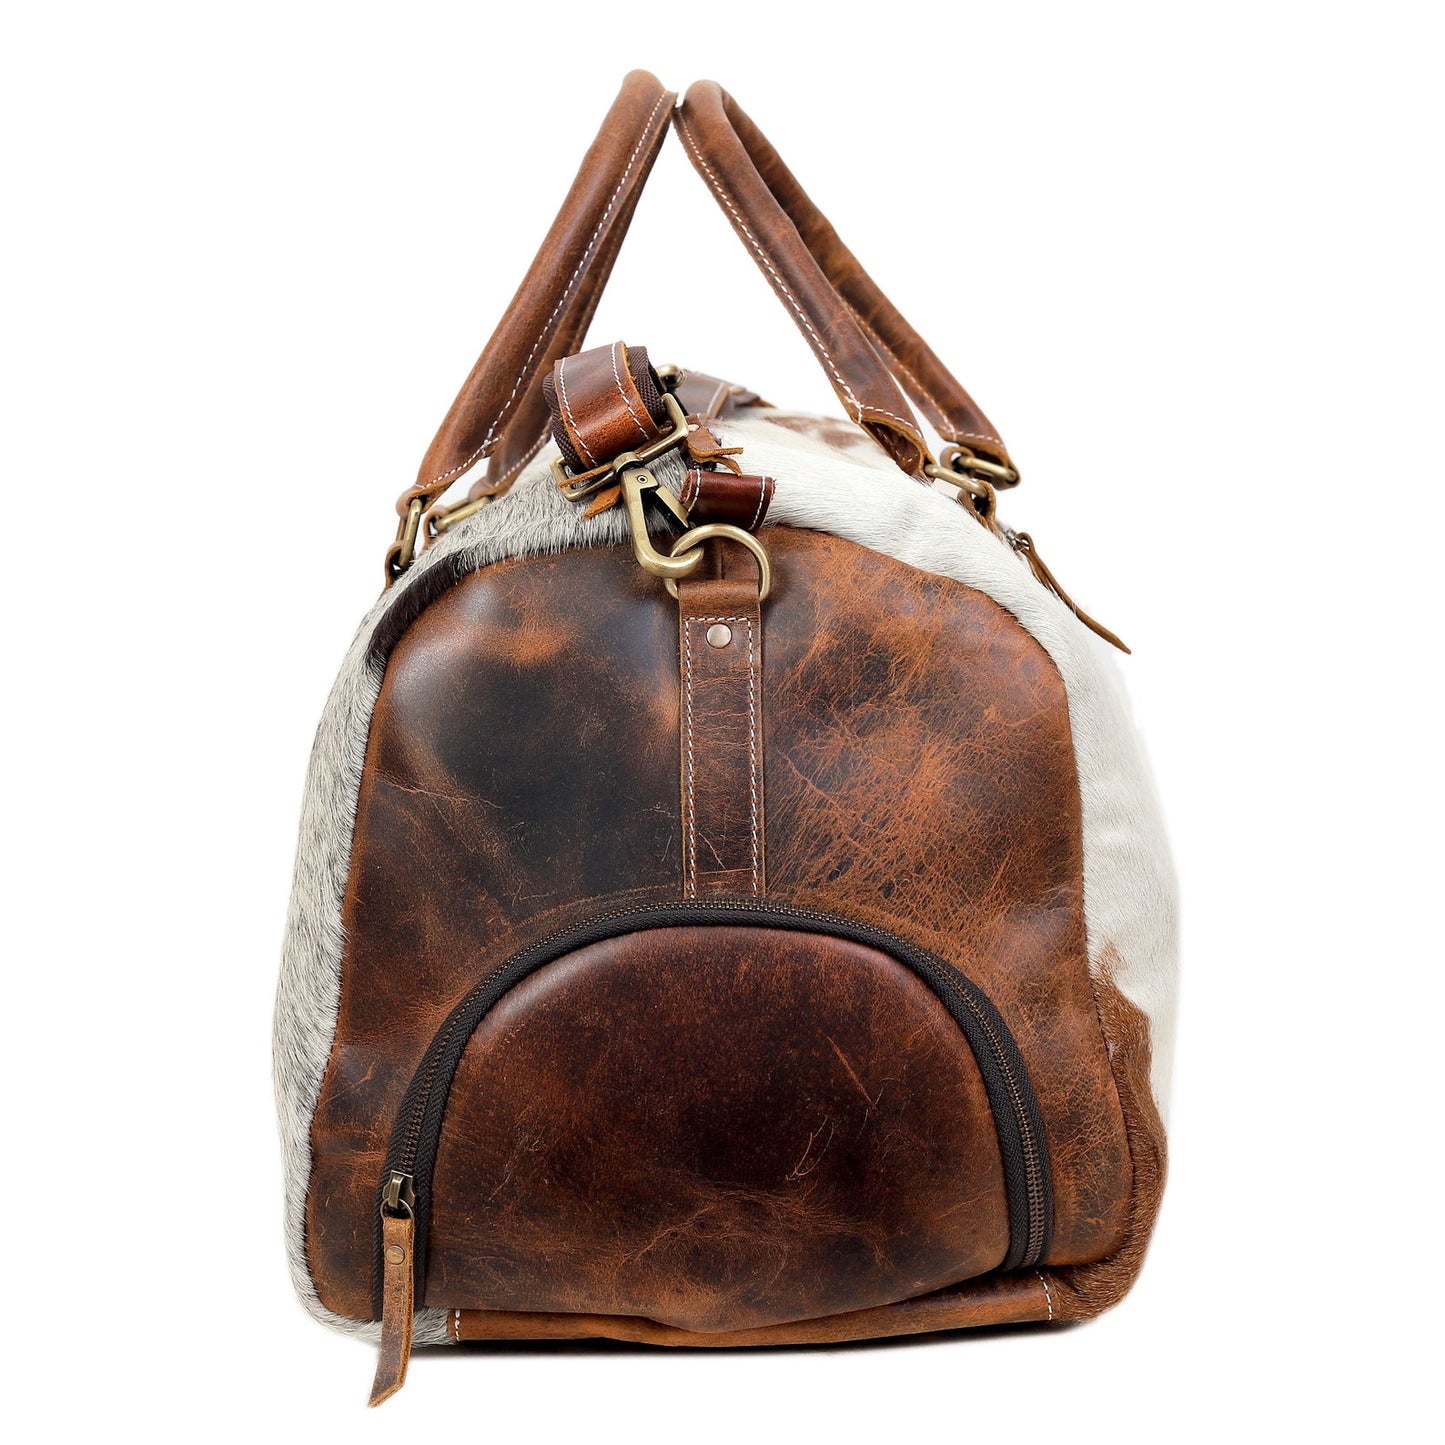 Real cowhide leather overnight travel bag